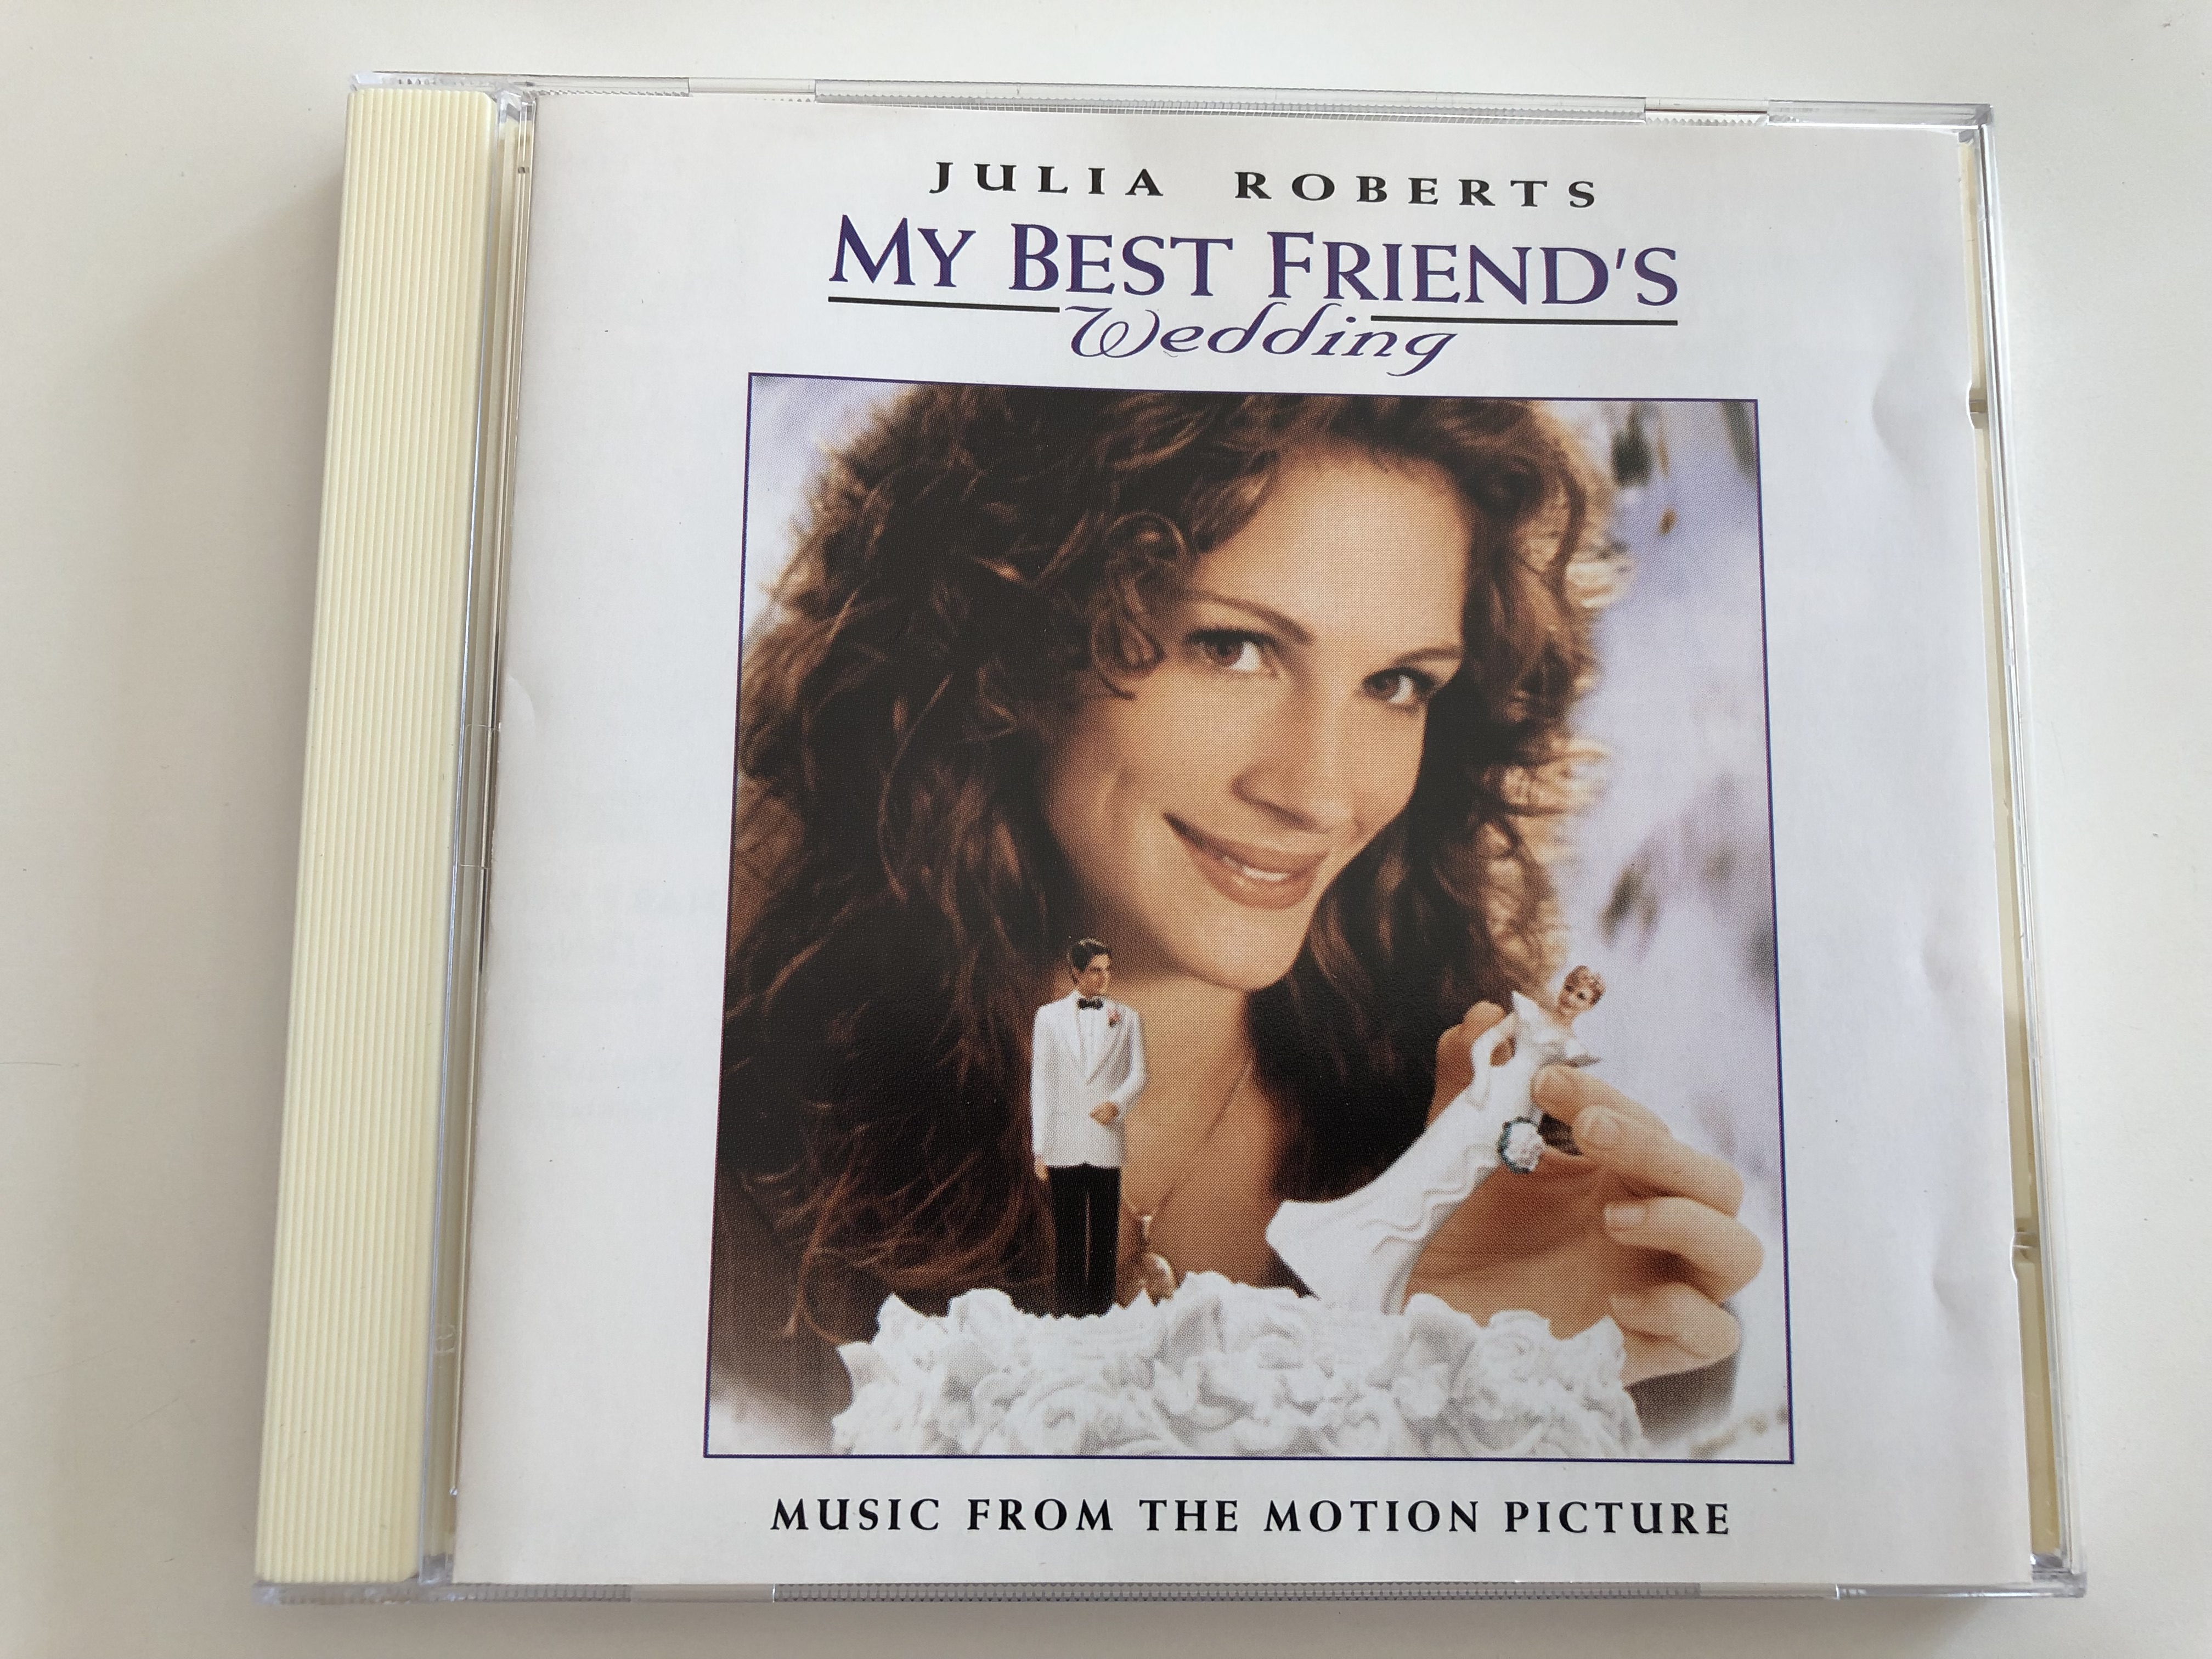 my-best-friend-s-wedding-julia-roberts-music-from-the-motion-picture-audio-cd-1997-columbia-wrk-488115-2-1-.jpg